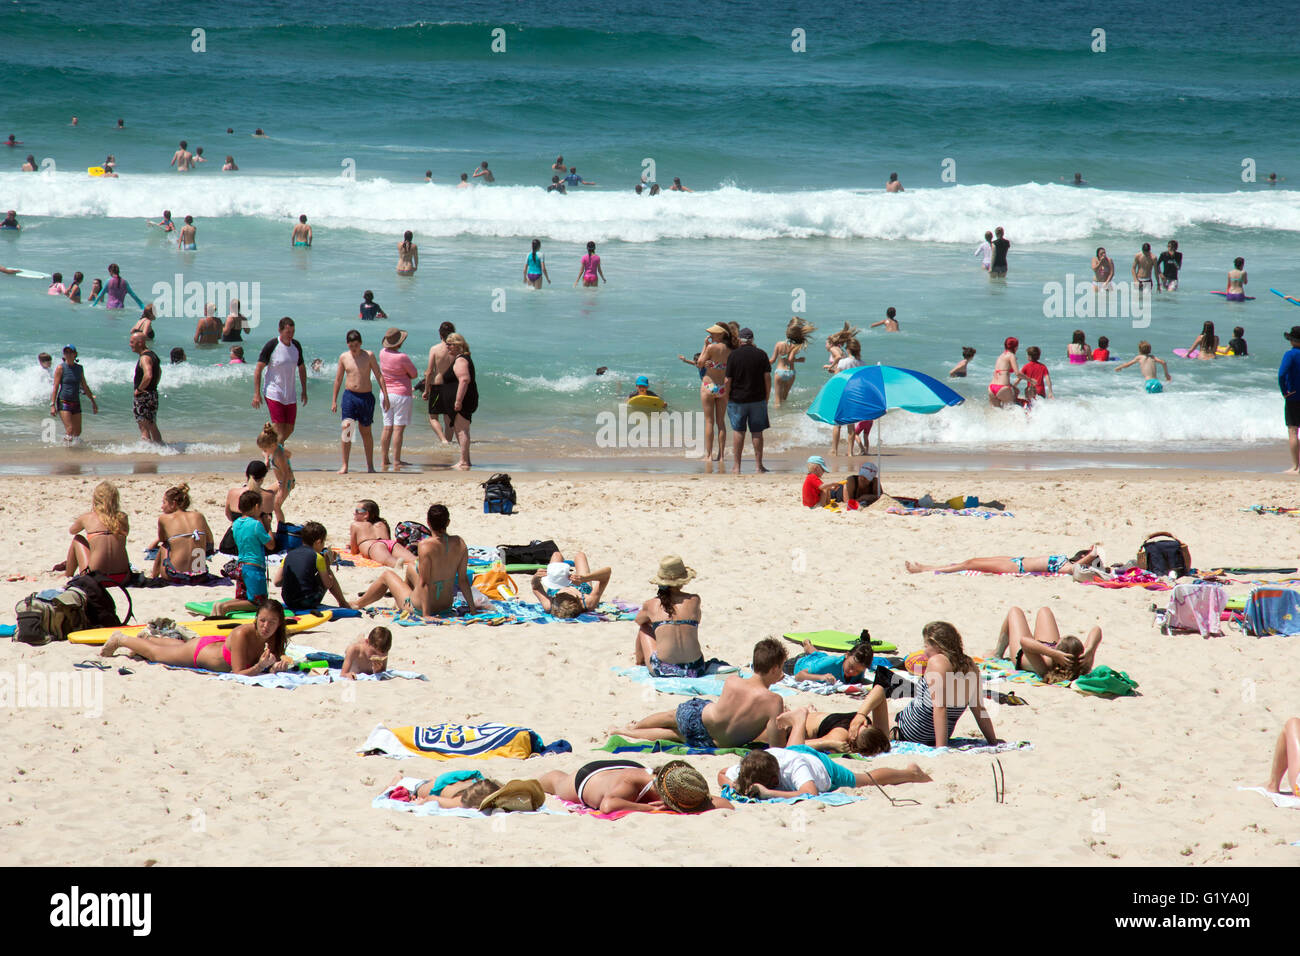 Diverse varer Nysgerrighed Ubetydelig People enjoying the beach and warm weather on the Gold Coast in Queensland  Australia Stock Photo - Alamy